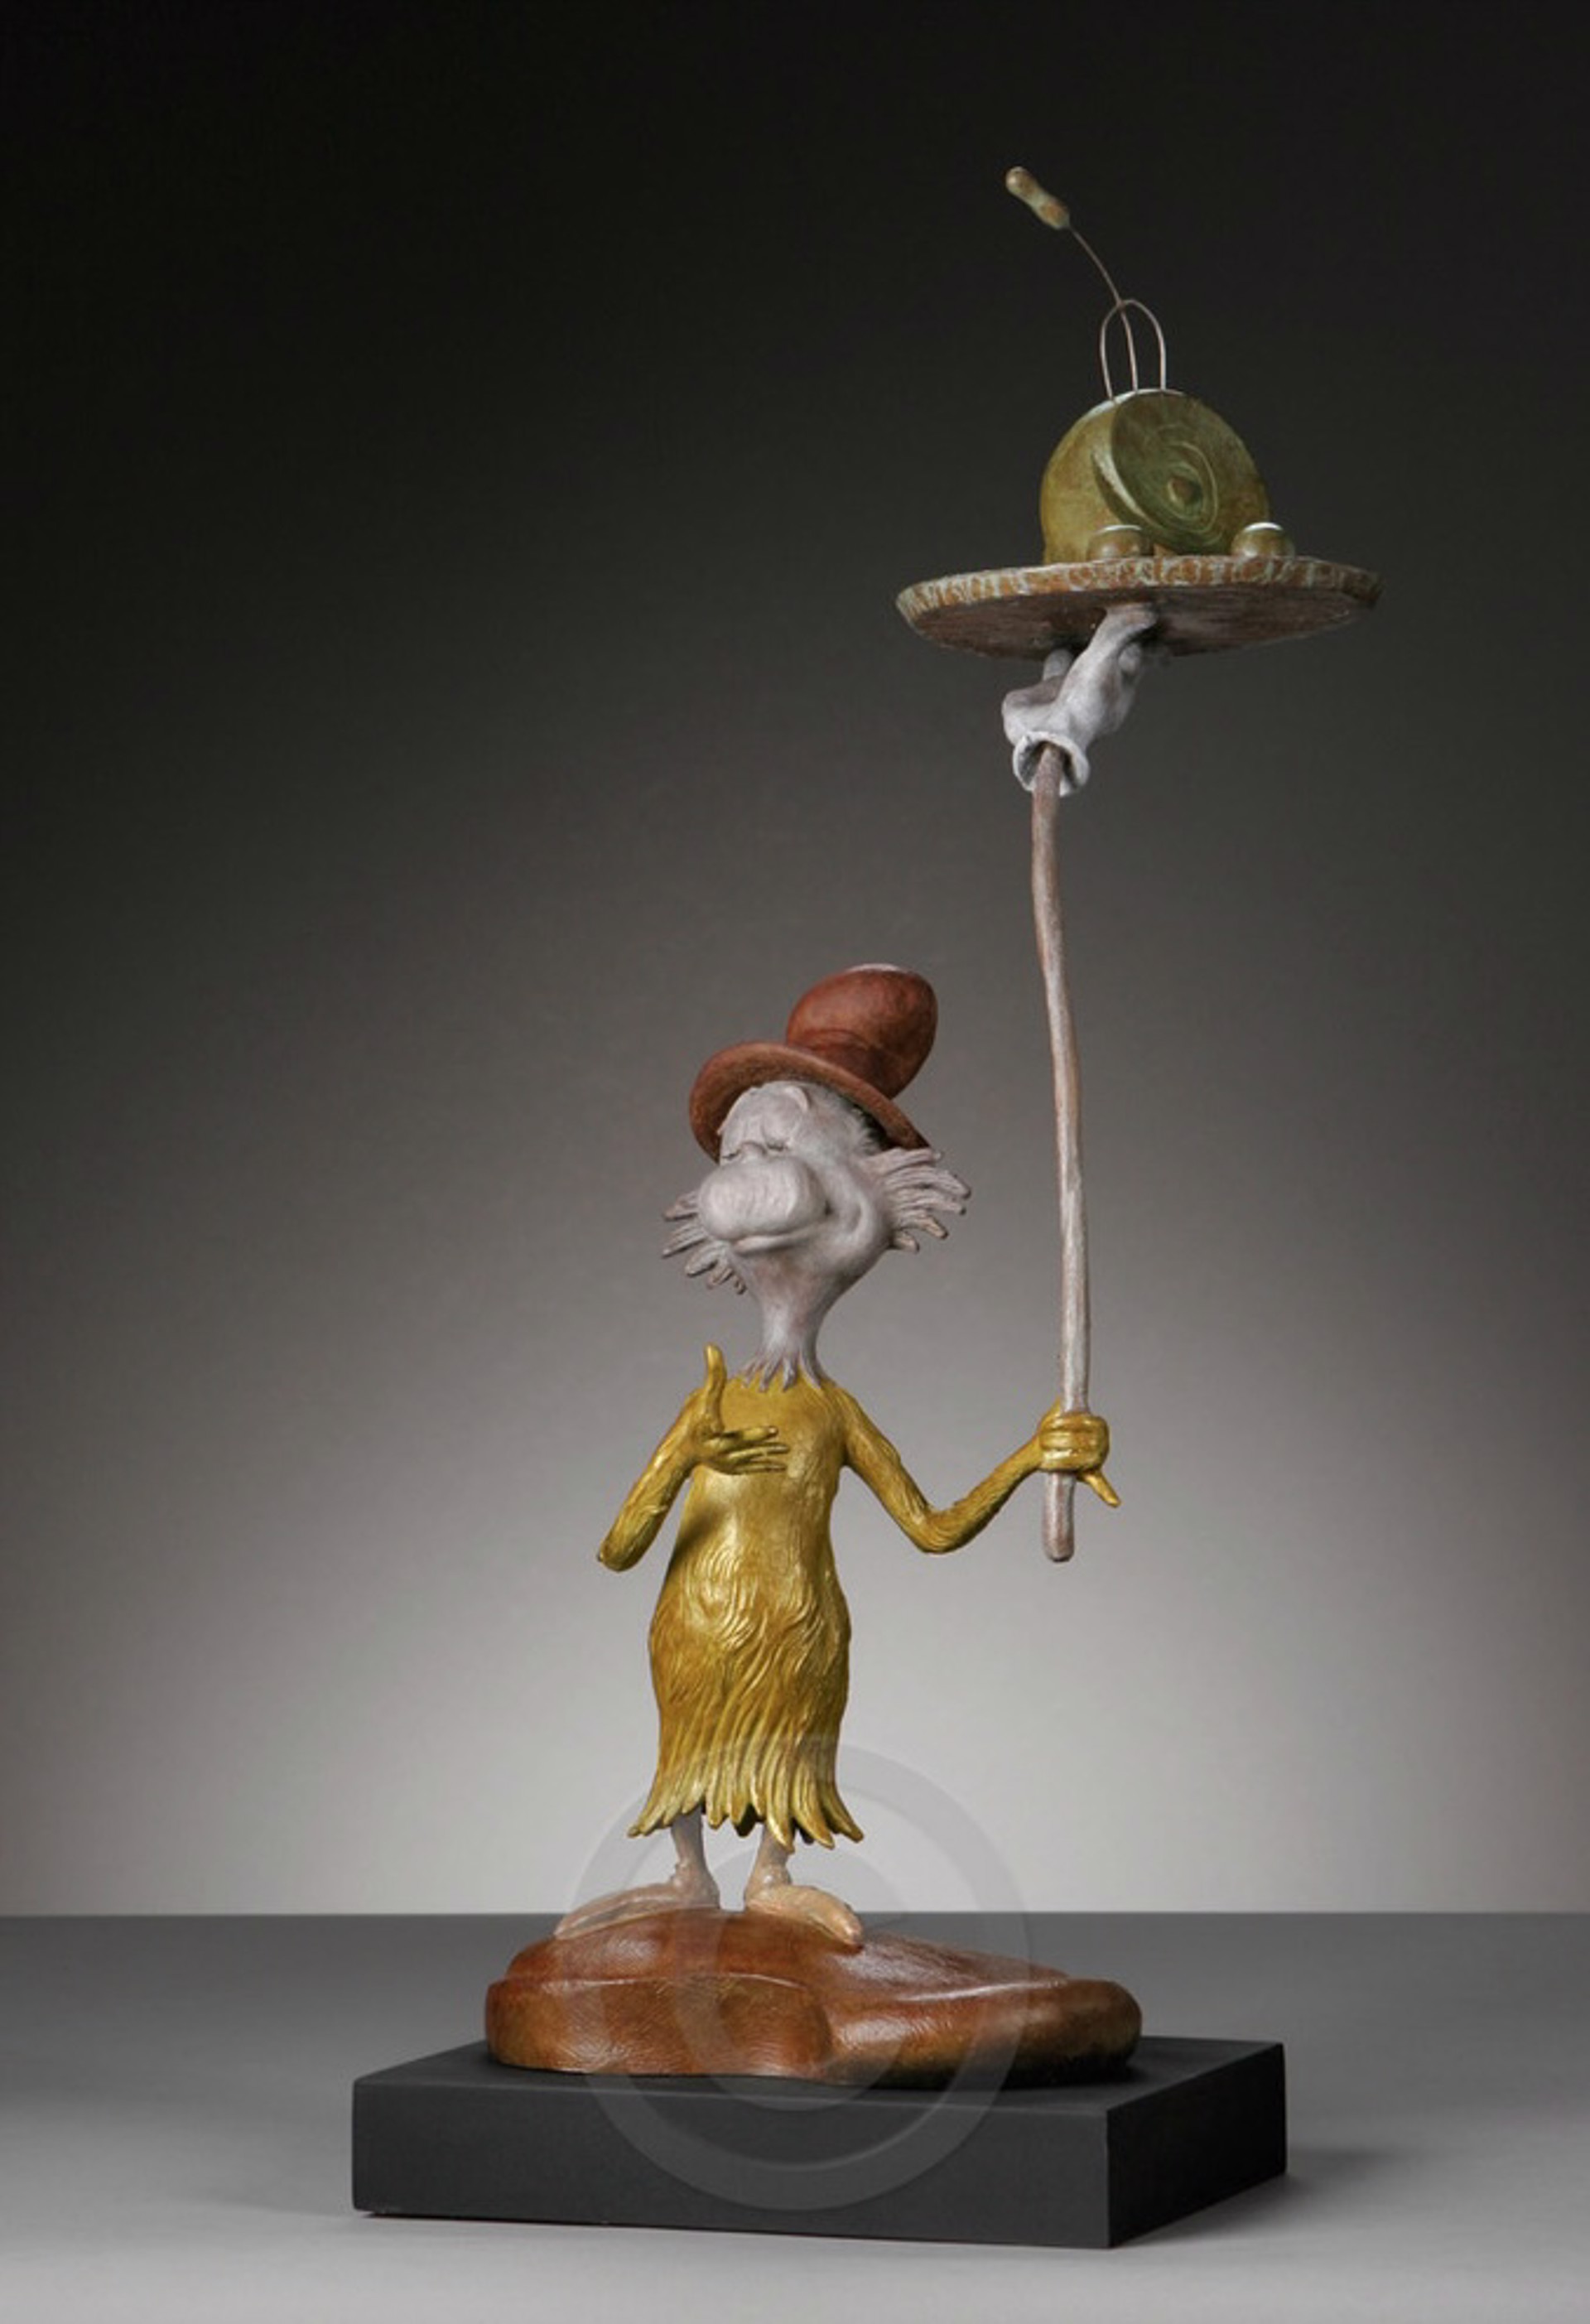 Green Eggs And Ham (Maquette) by Dr. Seuss